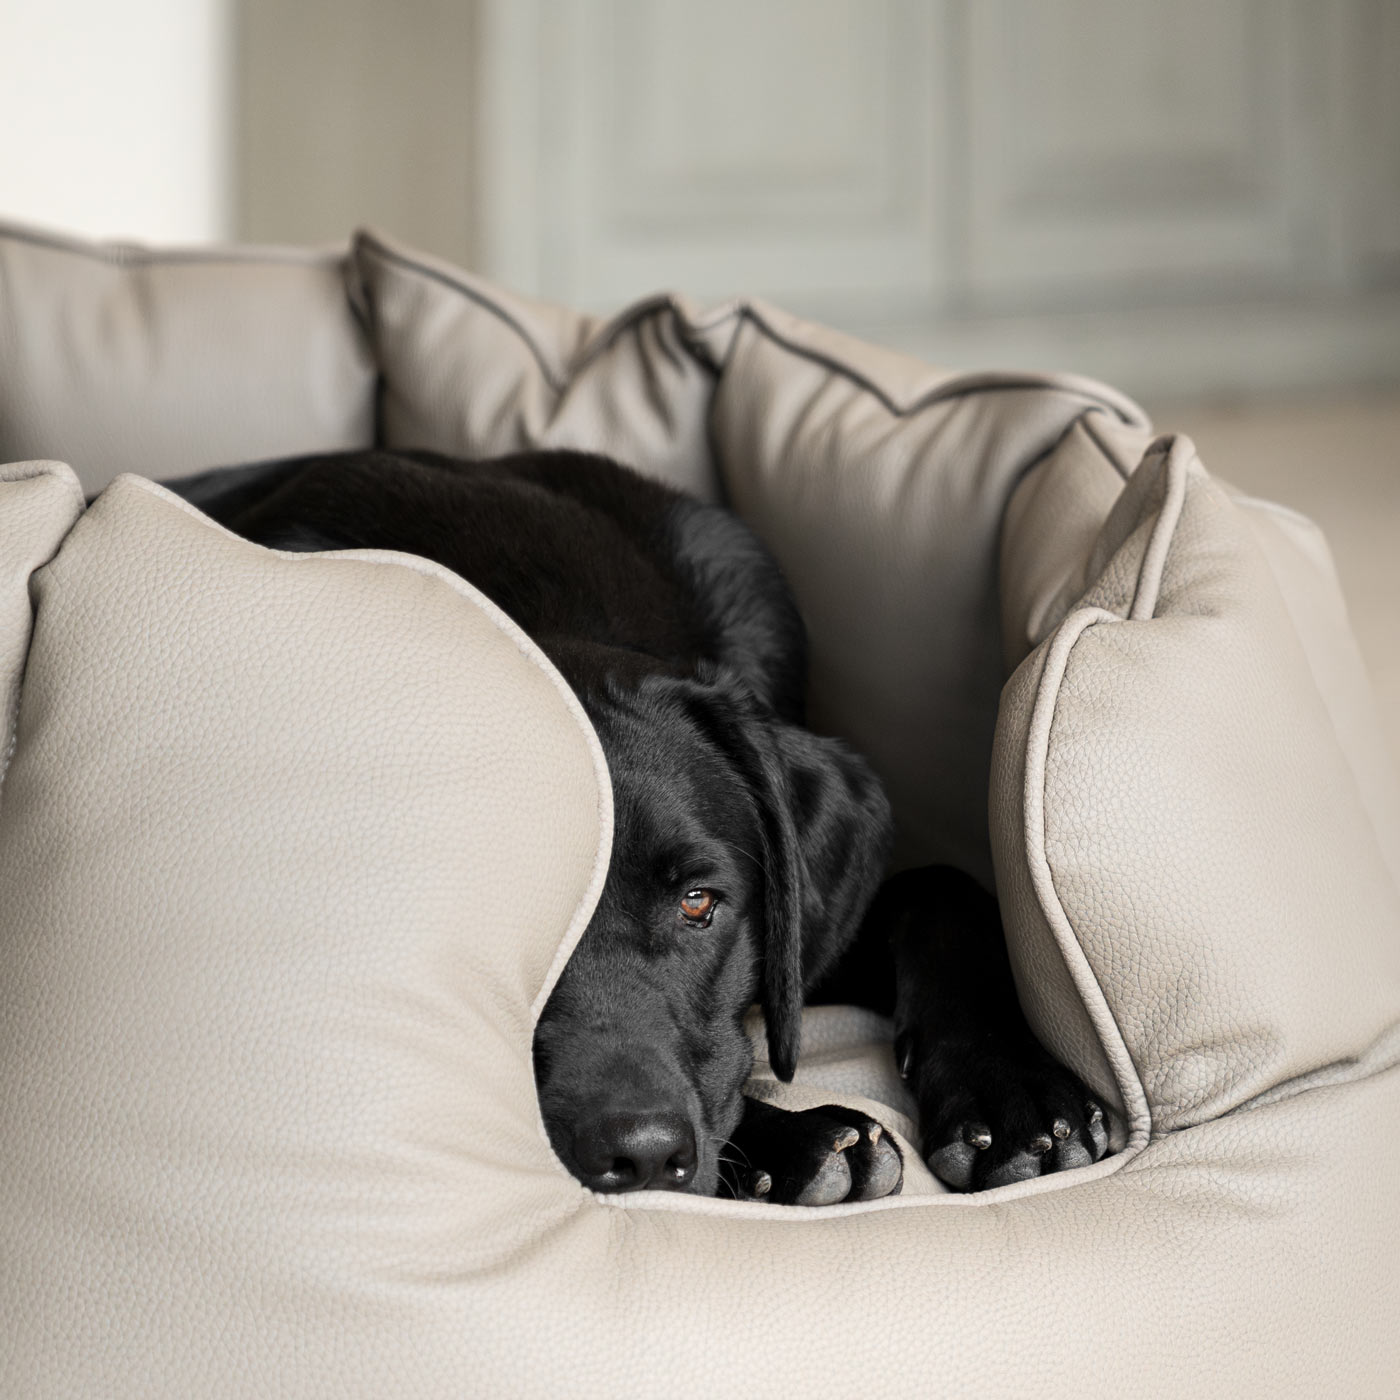 Luxury Handmade High Wall in Rhino Tough Desert Faux Leather, in Camel, Perfect For Your Pets Nap Time! Available To Personalize at Lords & Labradors US